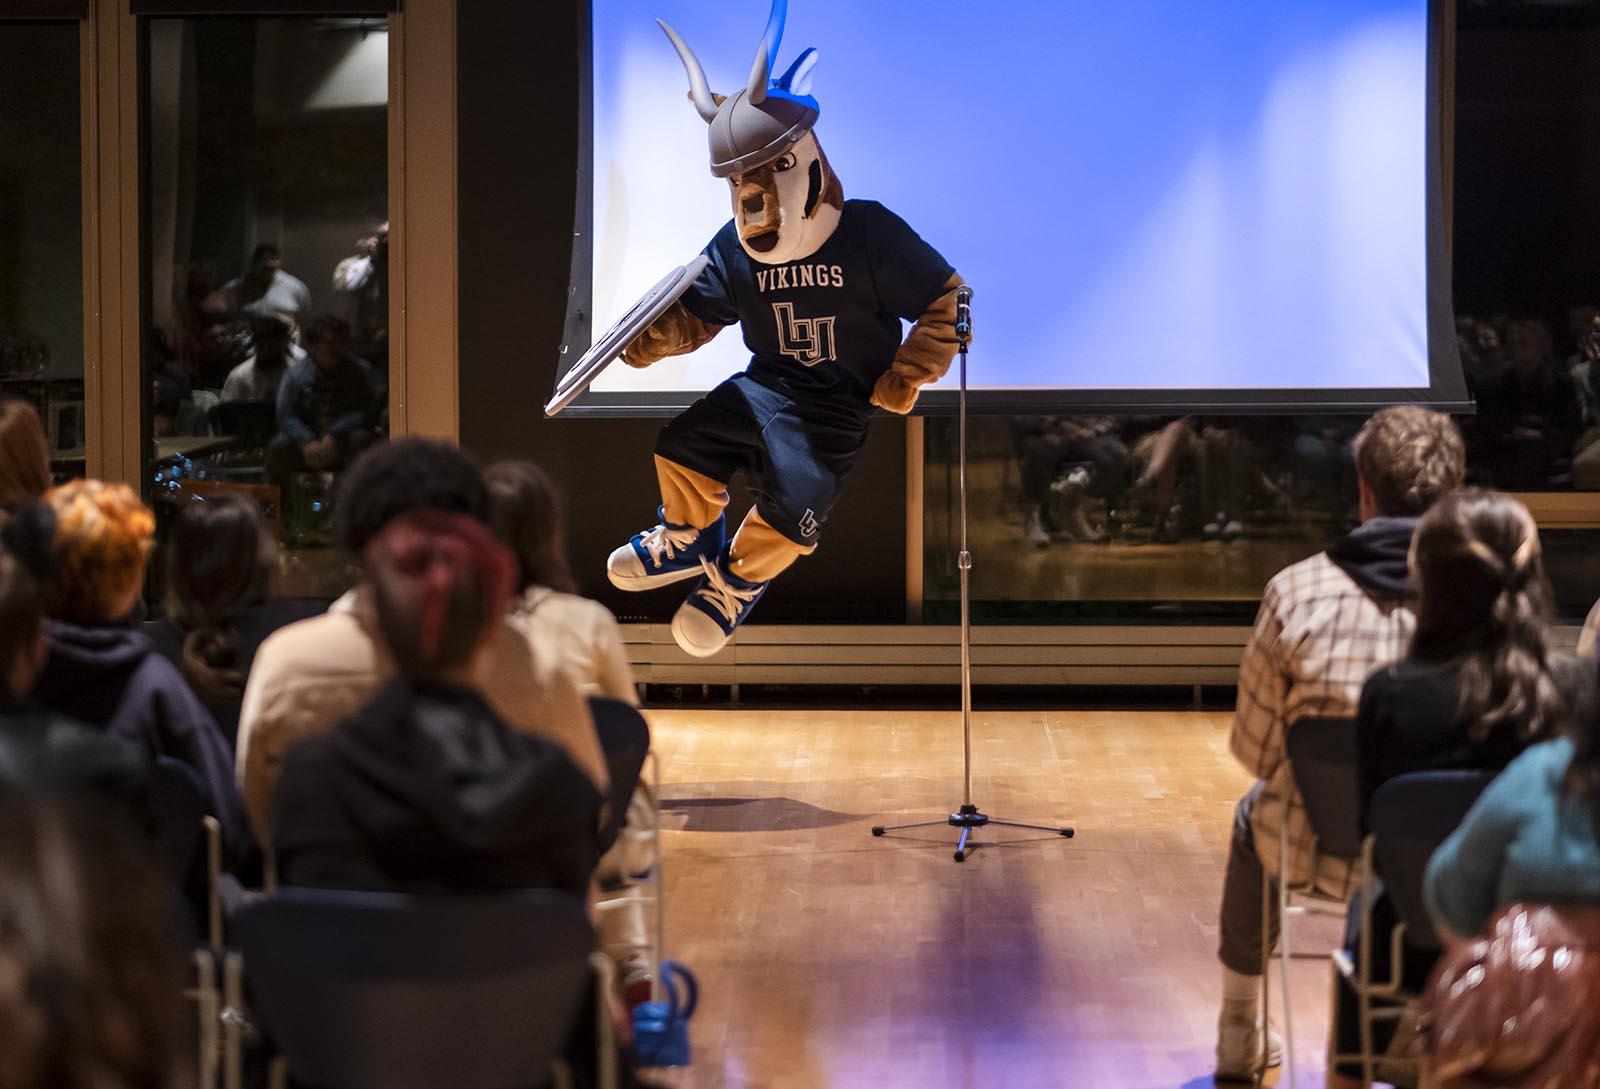 The mascot Blu does a heel kick during a talent show.